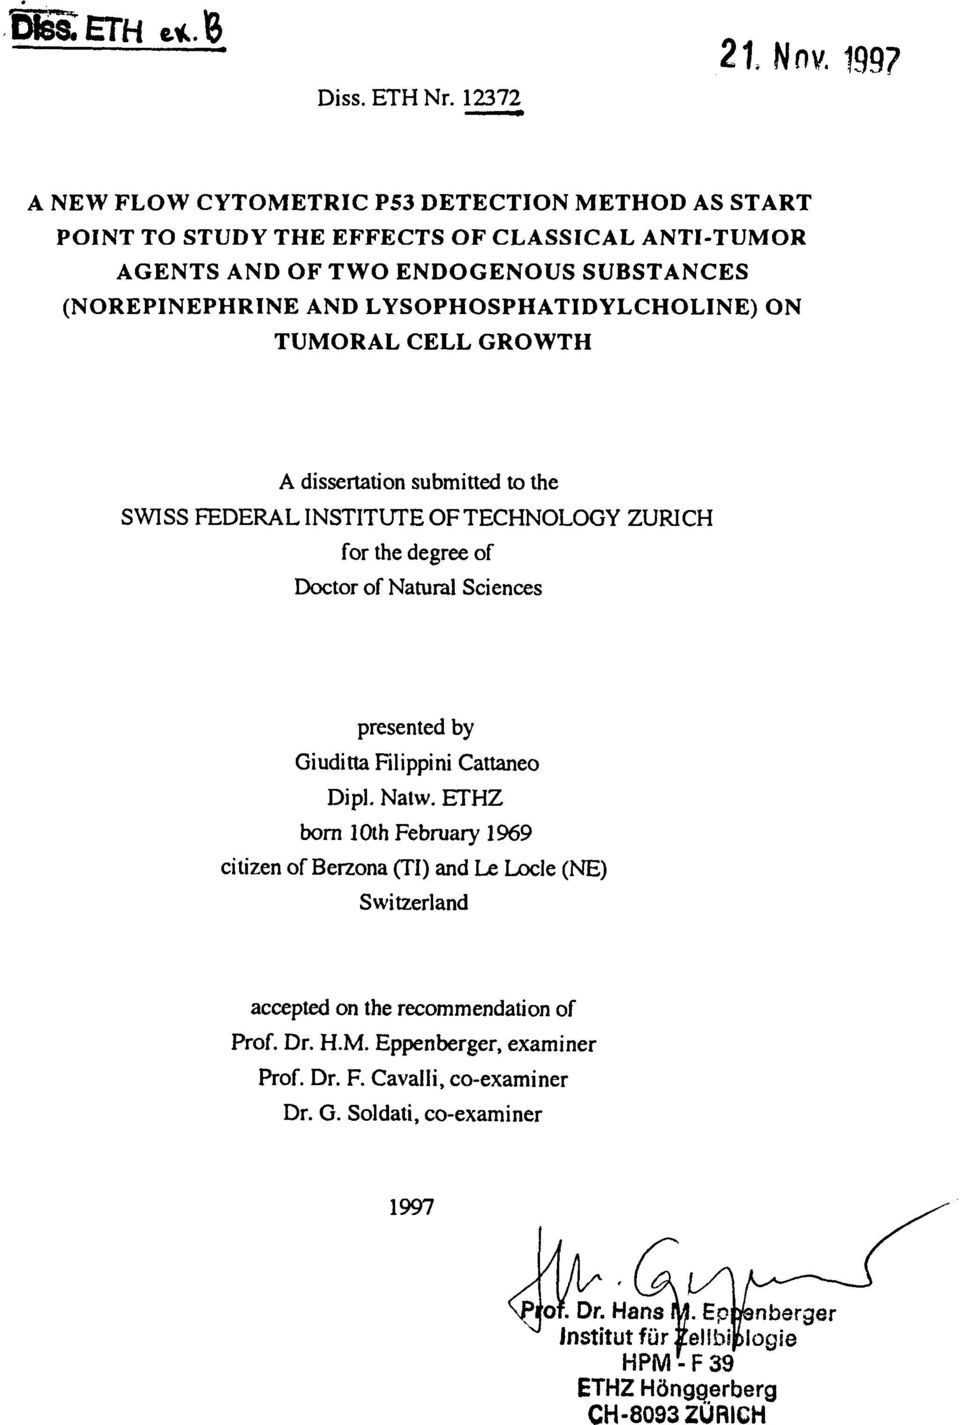 LYSOPHOSPHATIDYLCHOLINE) ON TUMORAL CELL GROWTH A dissertation submitted to the SWISS FEDERAL INSTITUTE OF TECHNOLOGY ZURICH for the degree of Doctor of Natural Sciences presented by